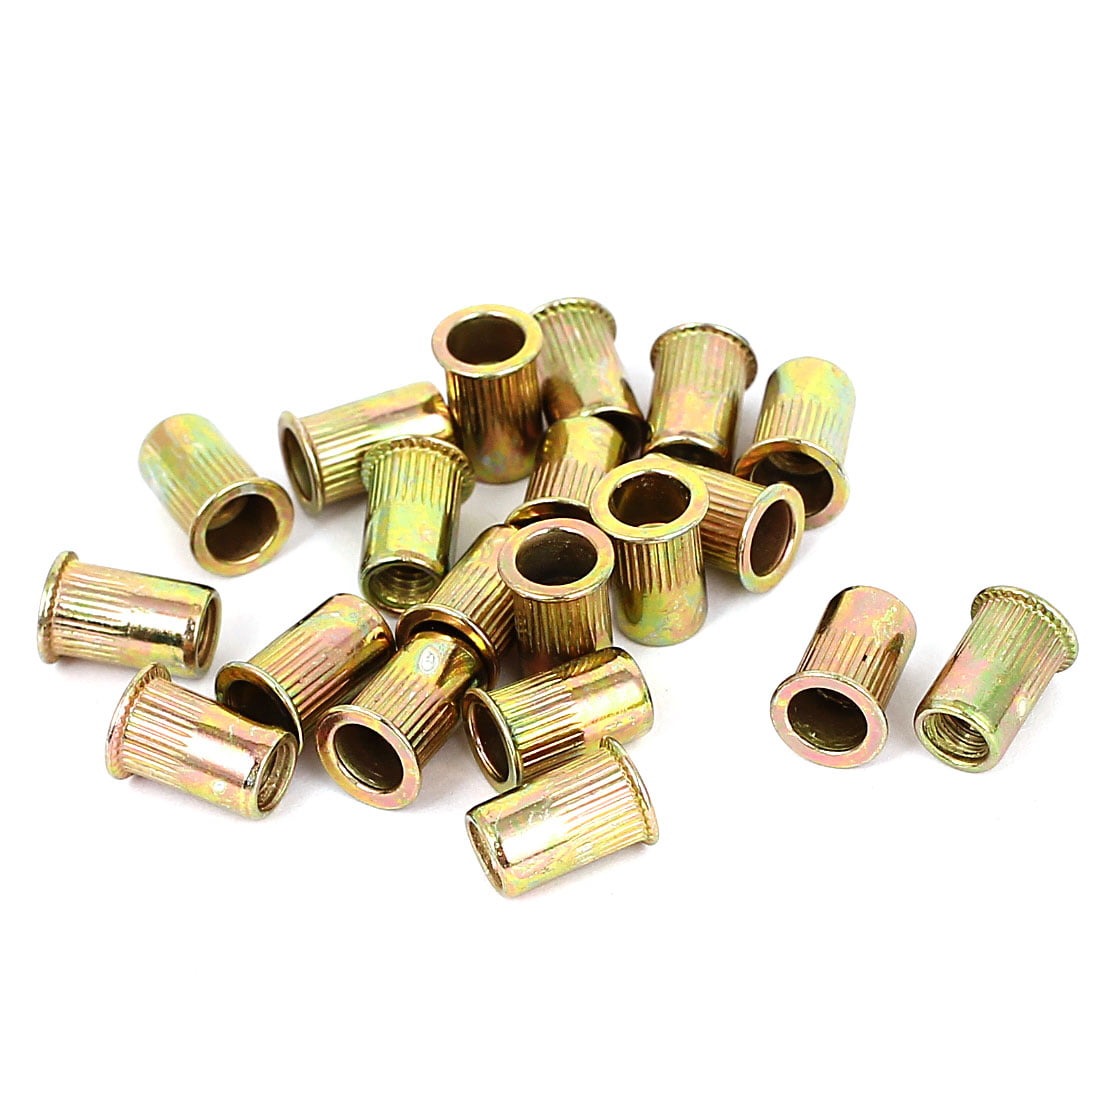 Pack of 10 Nutserts M4 Cylindrical Steel Large Head Rivnuts Blind Nuts Rivet Nuts 